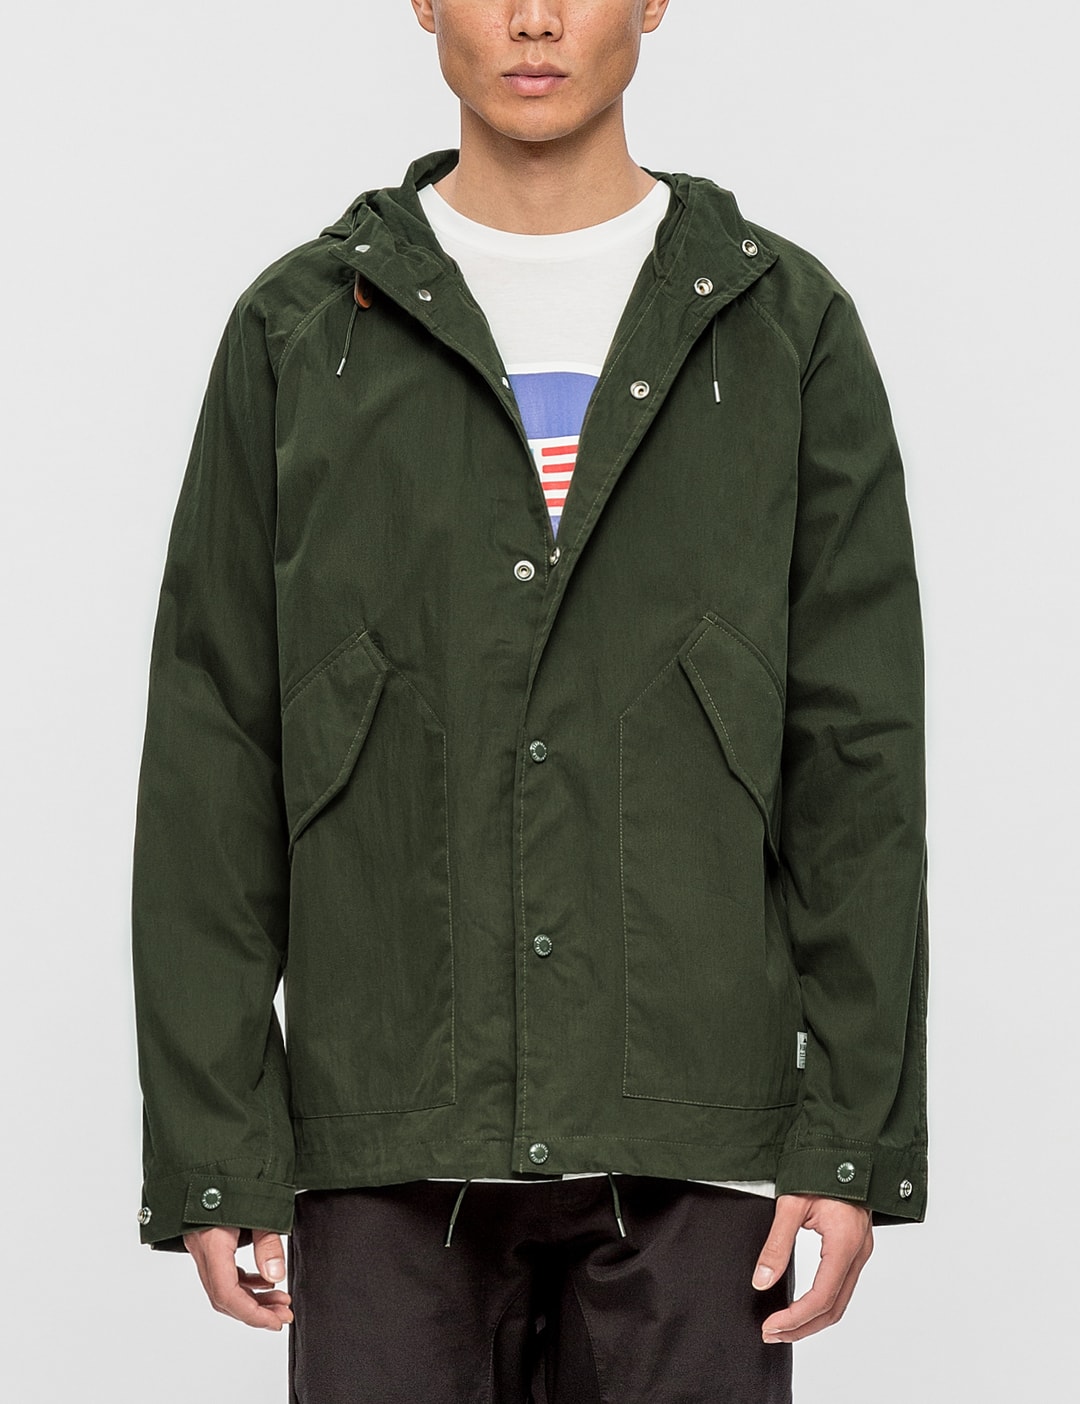 Penfield - Davenport Jacket | HBX - Globally Curated Fashion and ...